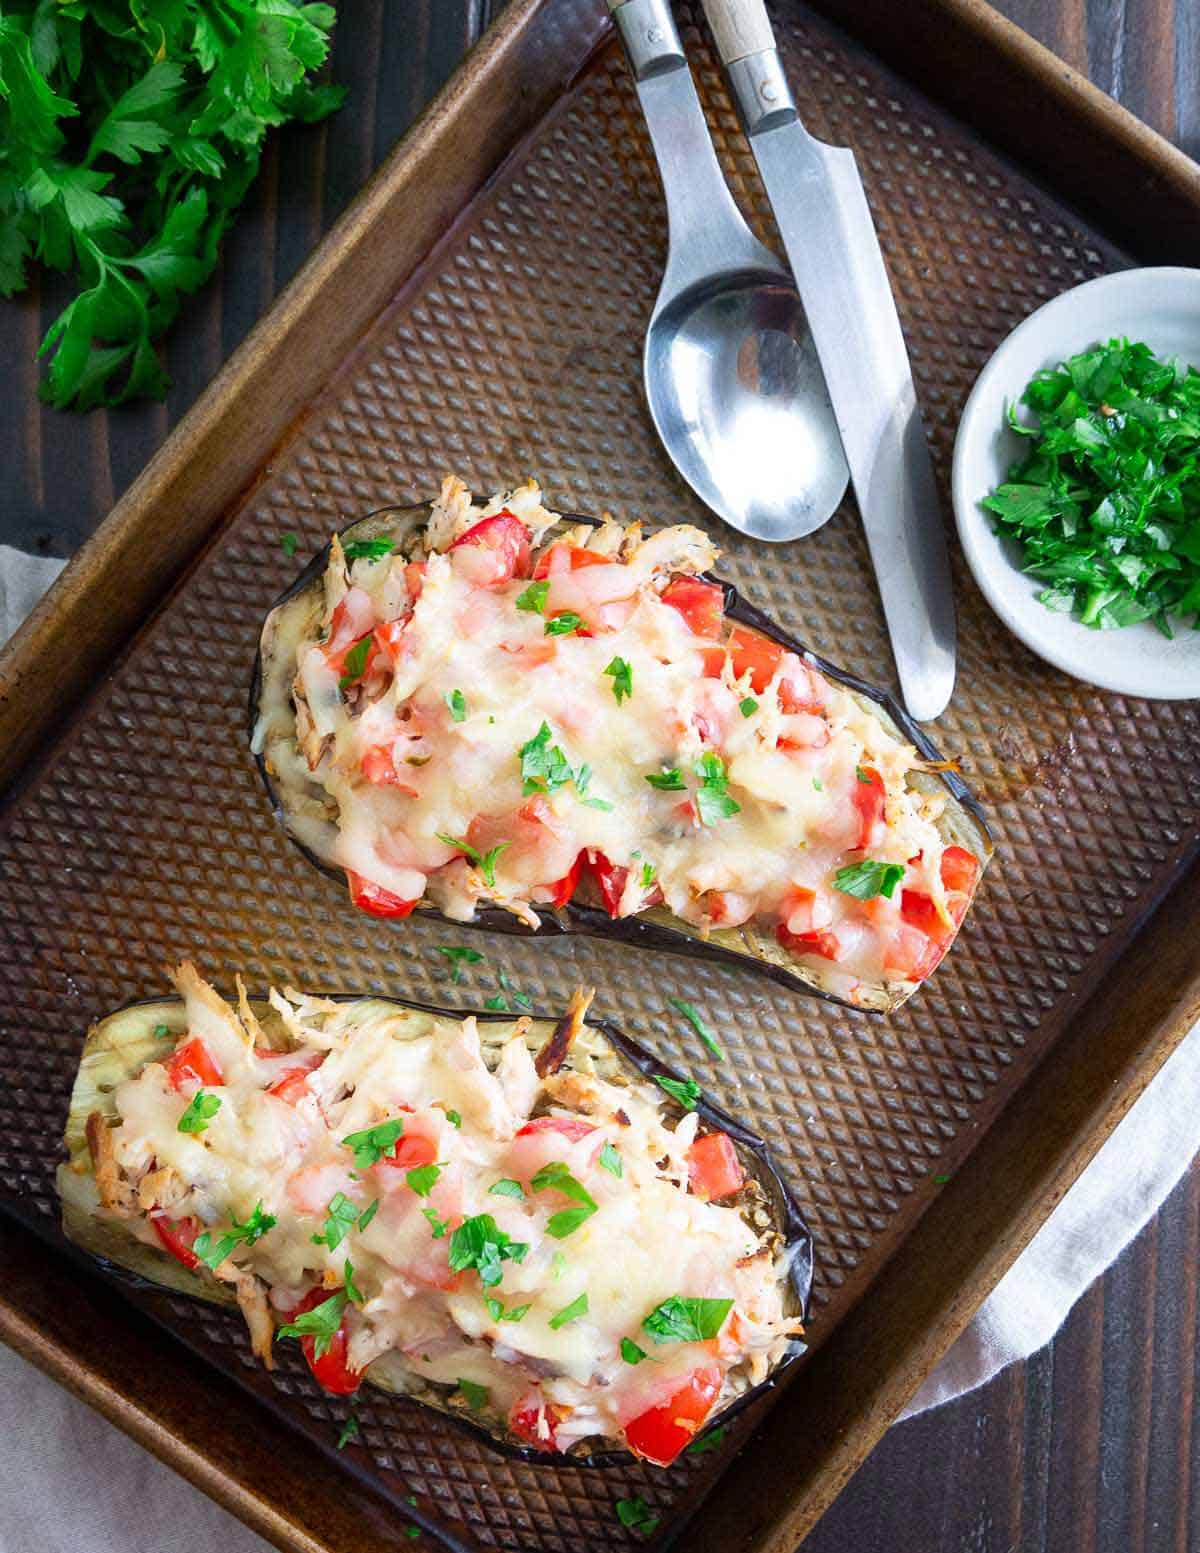 Eggplant stuffed with shredded chicken and cheese makes an easy, flavorful meal.